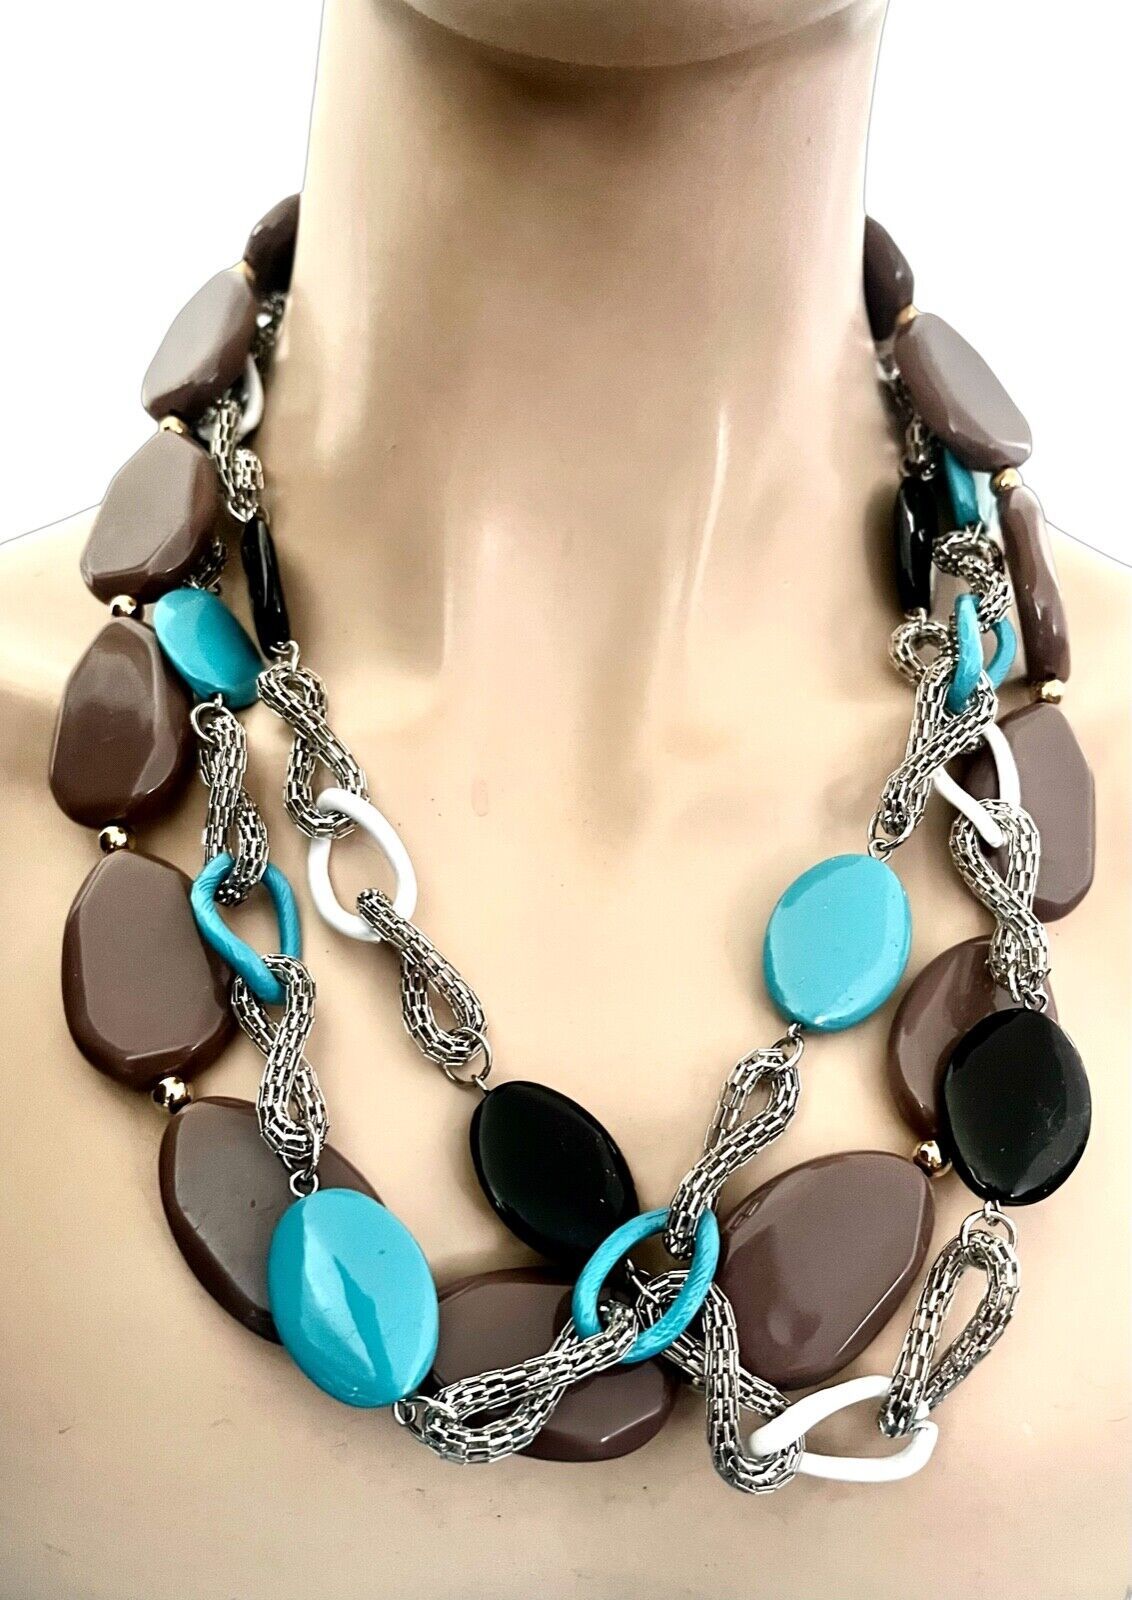 Lot Bundle 3 Casual Everyday Acrylic Bead Necklaces Brown, Black, Turquoise Blue - $17.10